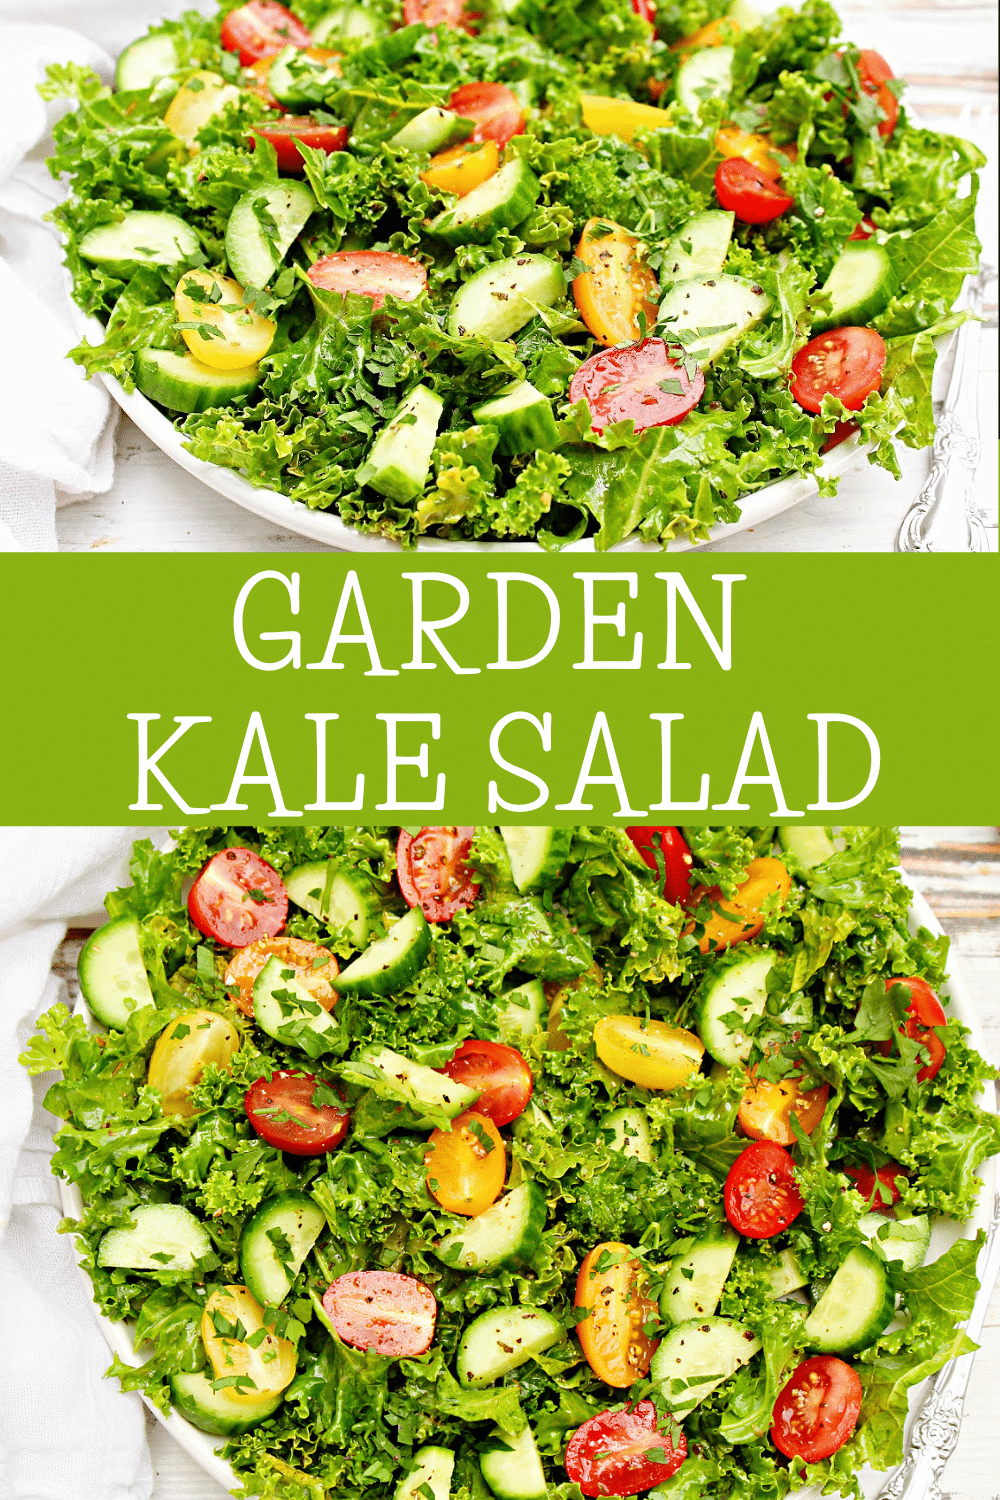 Garden Kale Salad ~ Simple kale salad with lemon vinaigrette and garden-fresh vegetables. Easy to make and ready in minutes! via @thiswifecooks